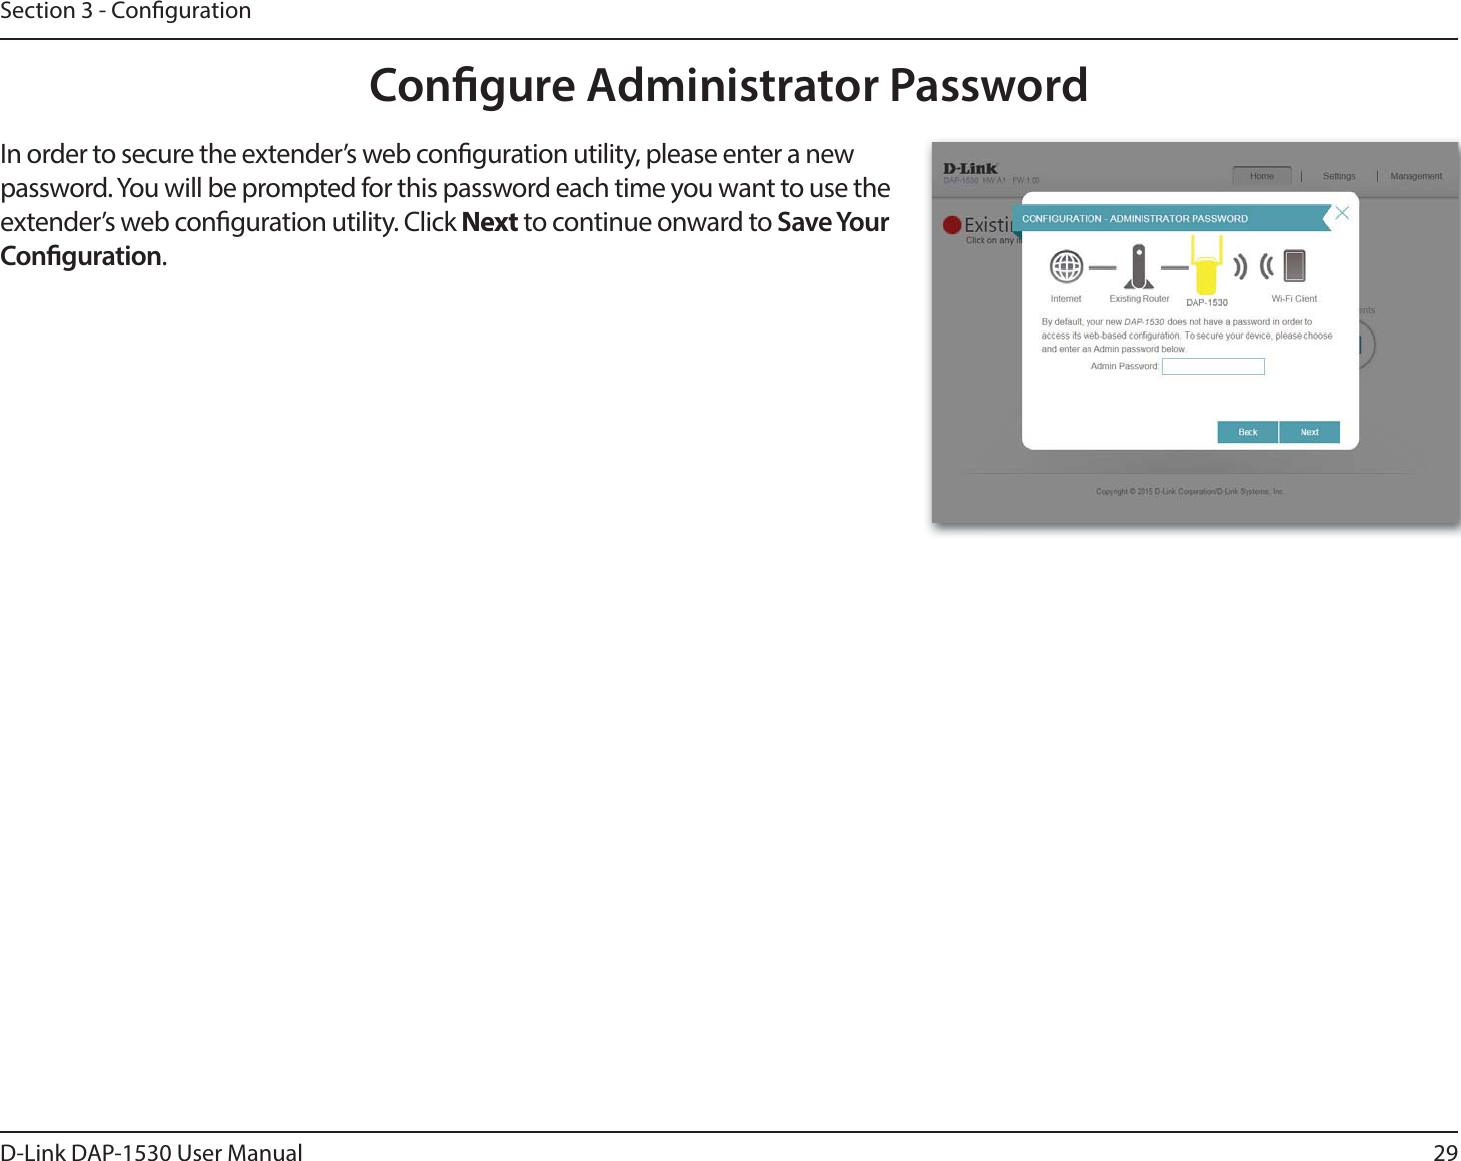 29D-Link DAP-1530 User ManualSection 3 - CongurationCongure Administrator PasswordIn order to secure the extender’s web conguration utility, please enter a new password. You will be prompted for this password each time you want to use the extender’s web conguration utility. Click Next to continue onward to Save Your Conguration.